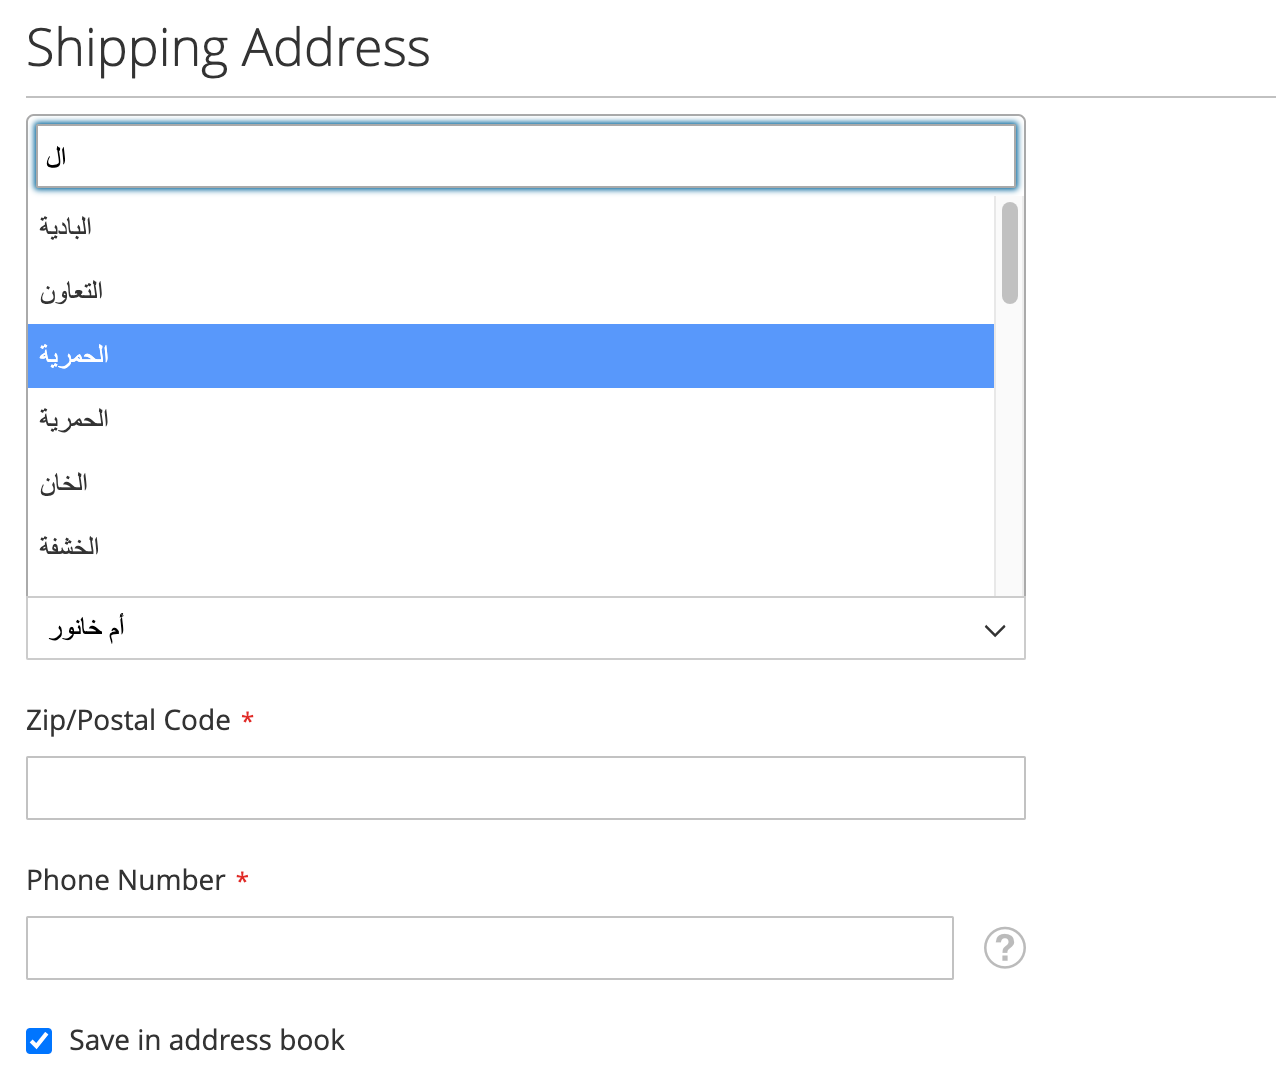 Customer Address City Dropdown with Multiple Locale (Arabic) Search Option